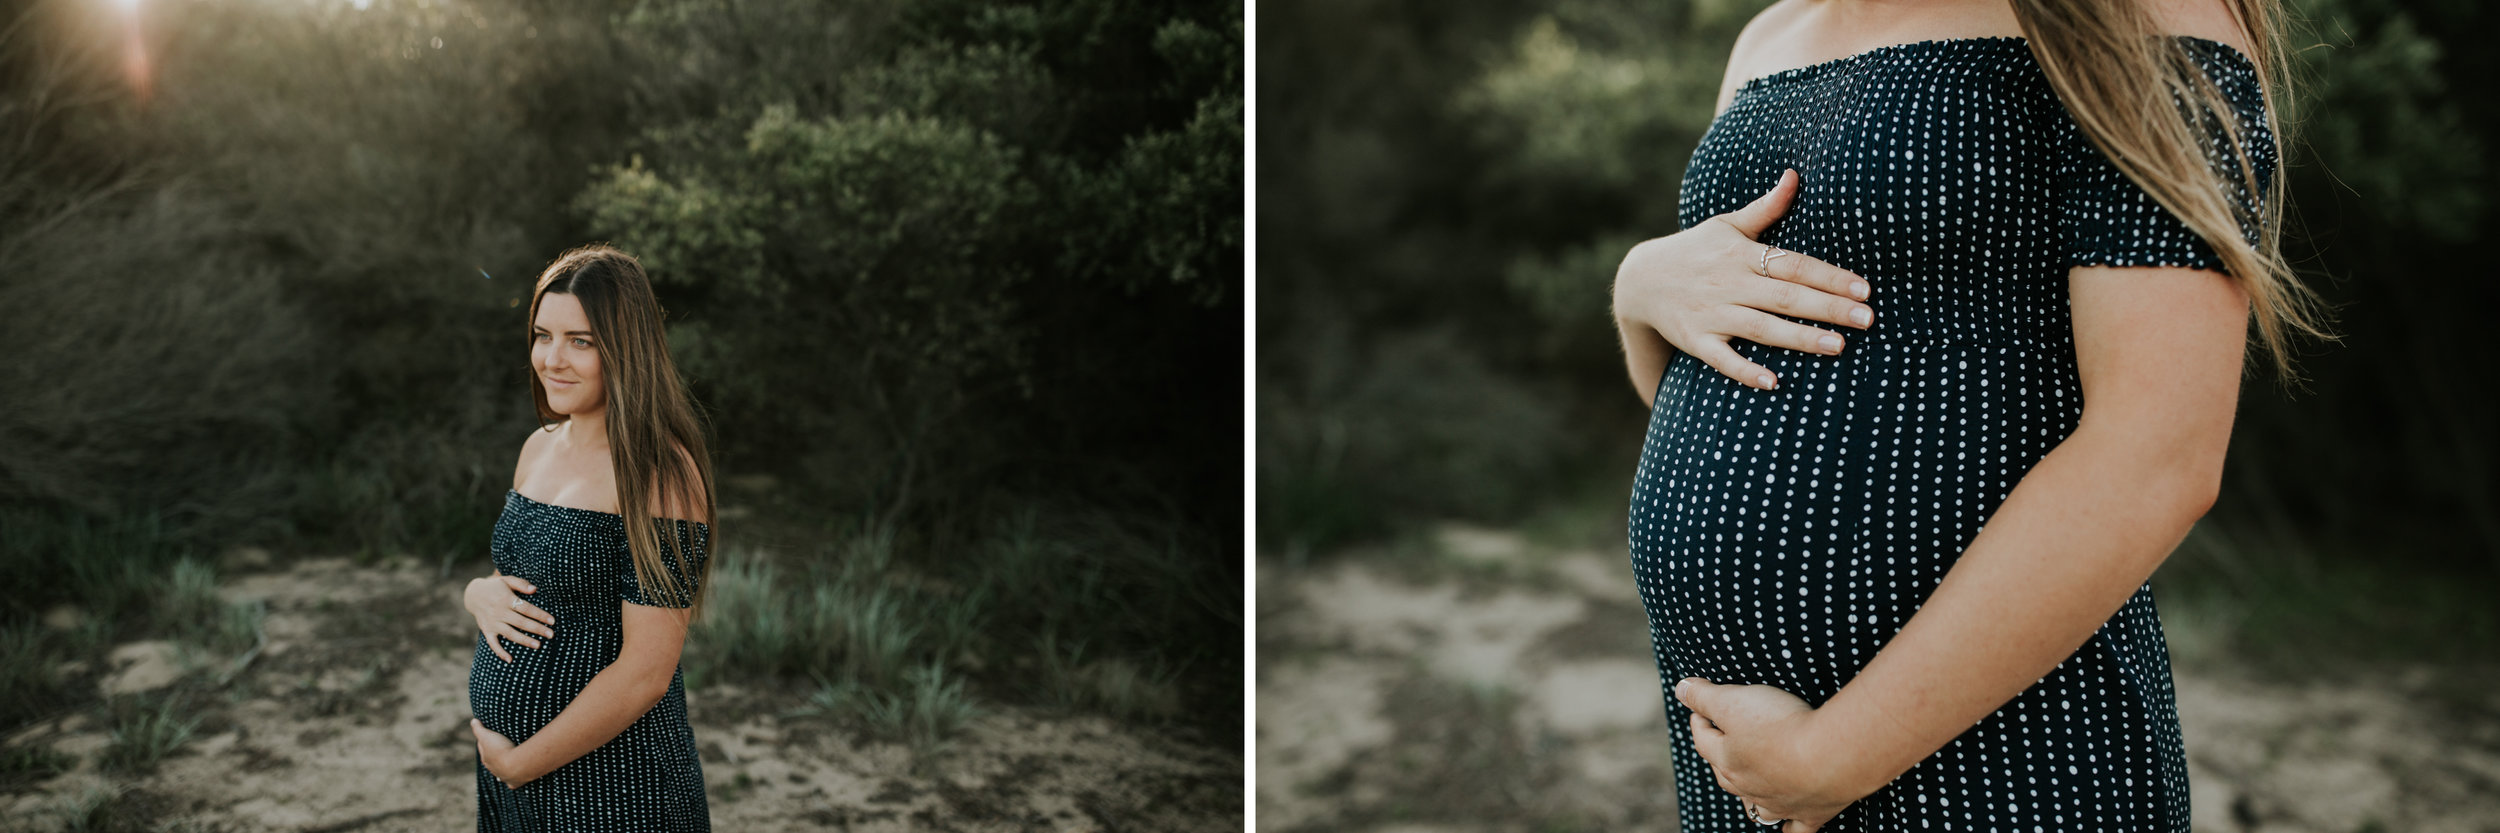 AMY+ANDREW+SHOALHAVEN+HEADS+BEACH+MATERNITY+SESSION+RELAXED-2.jpg